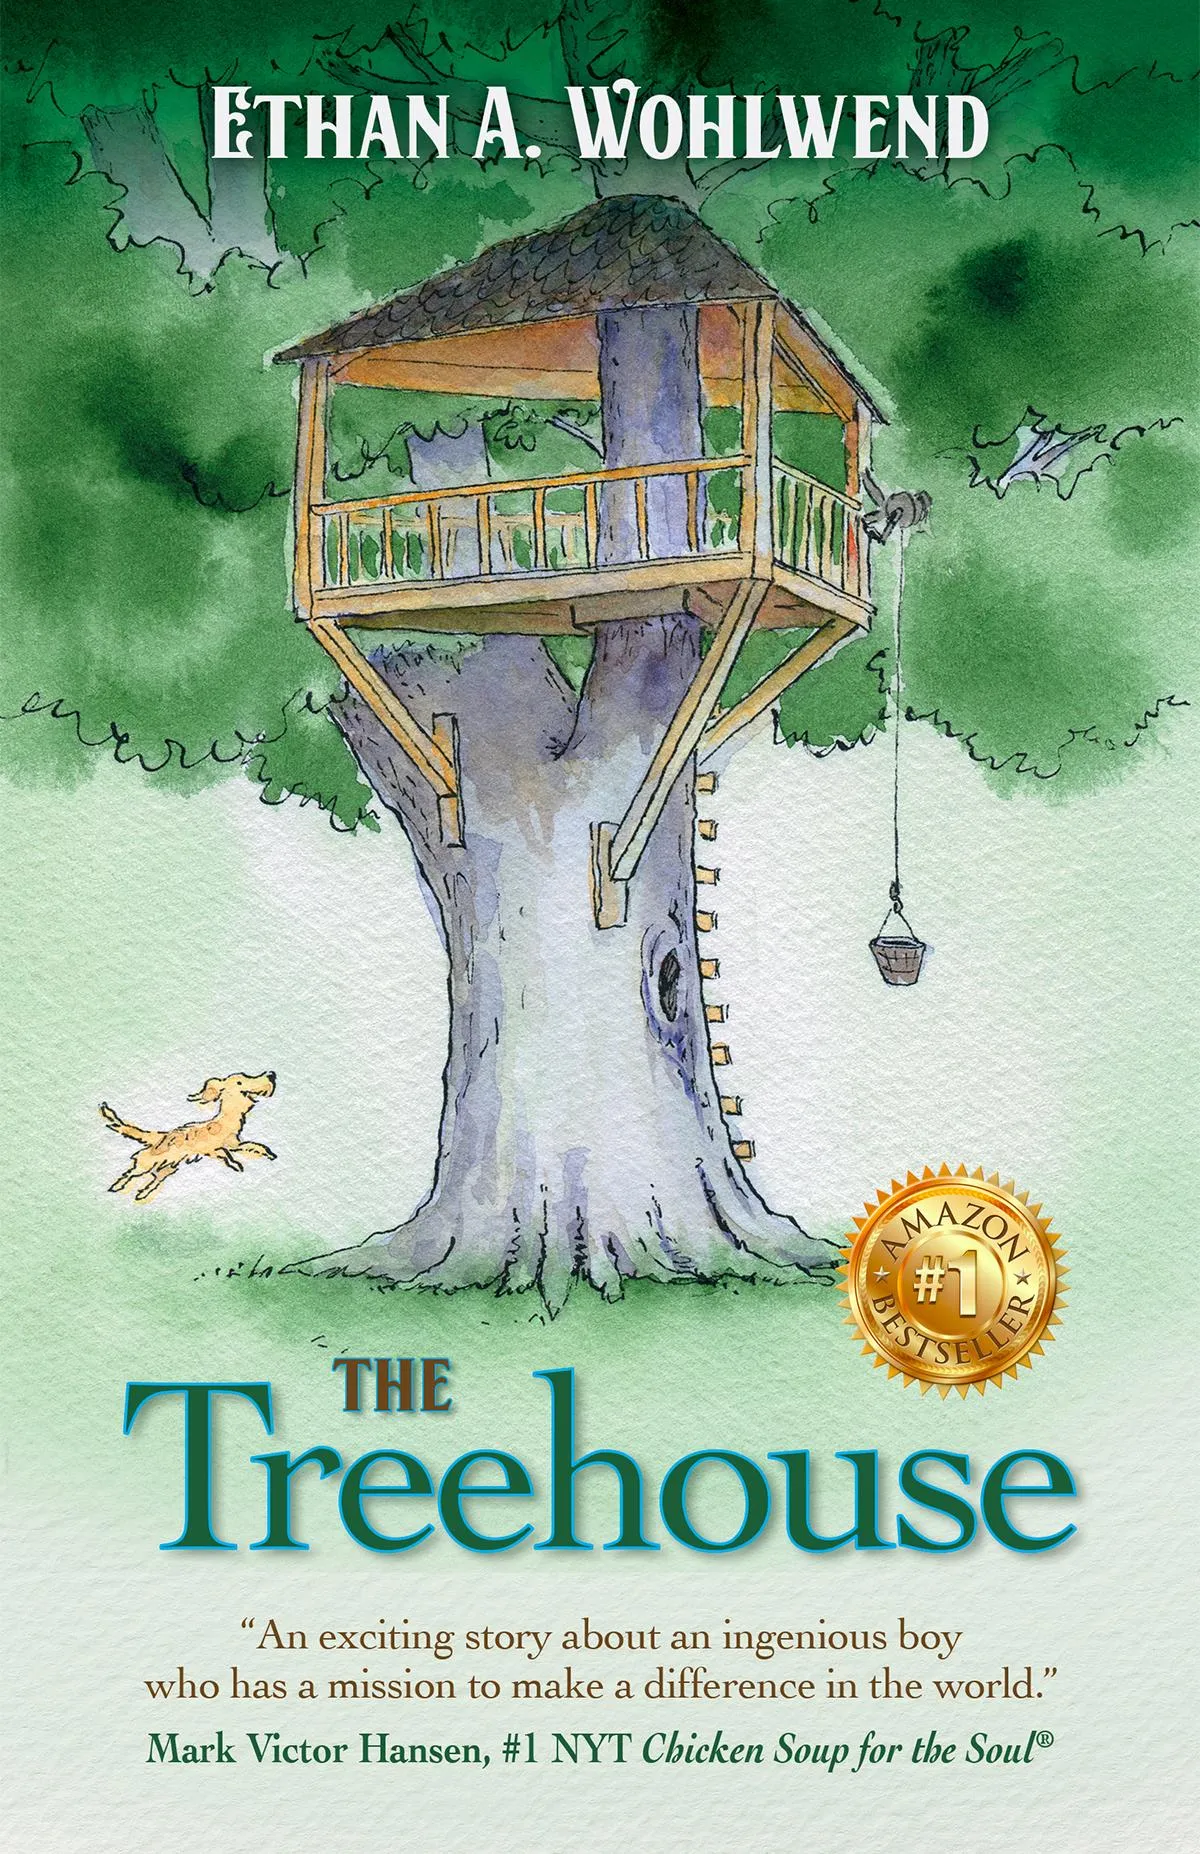 The Treehouse by Ethan A. Wohlwend